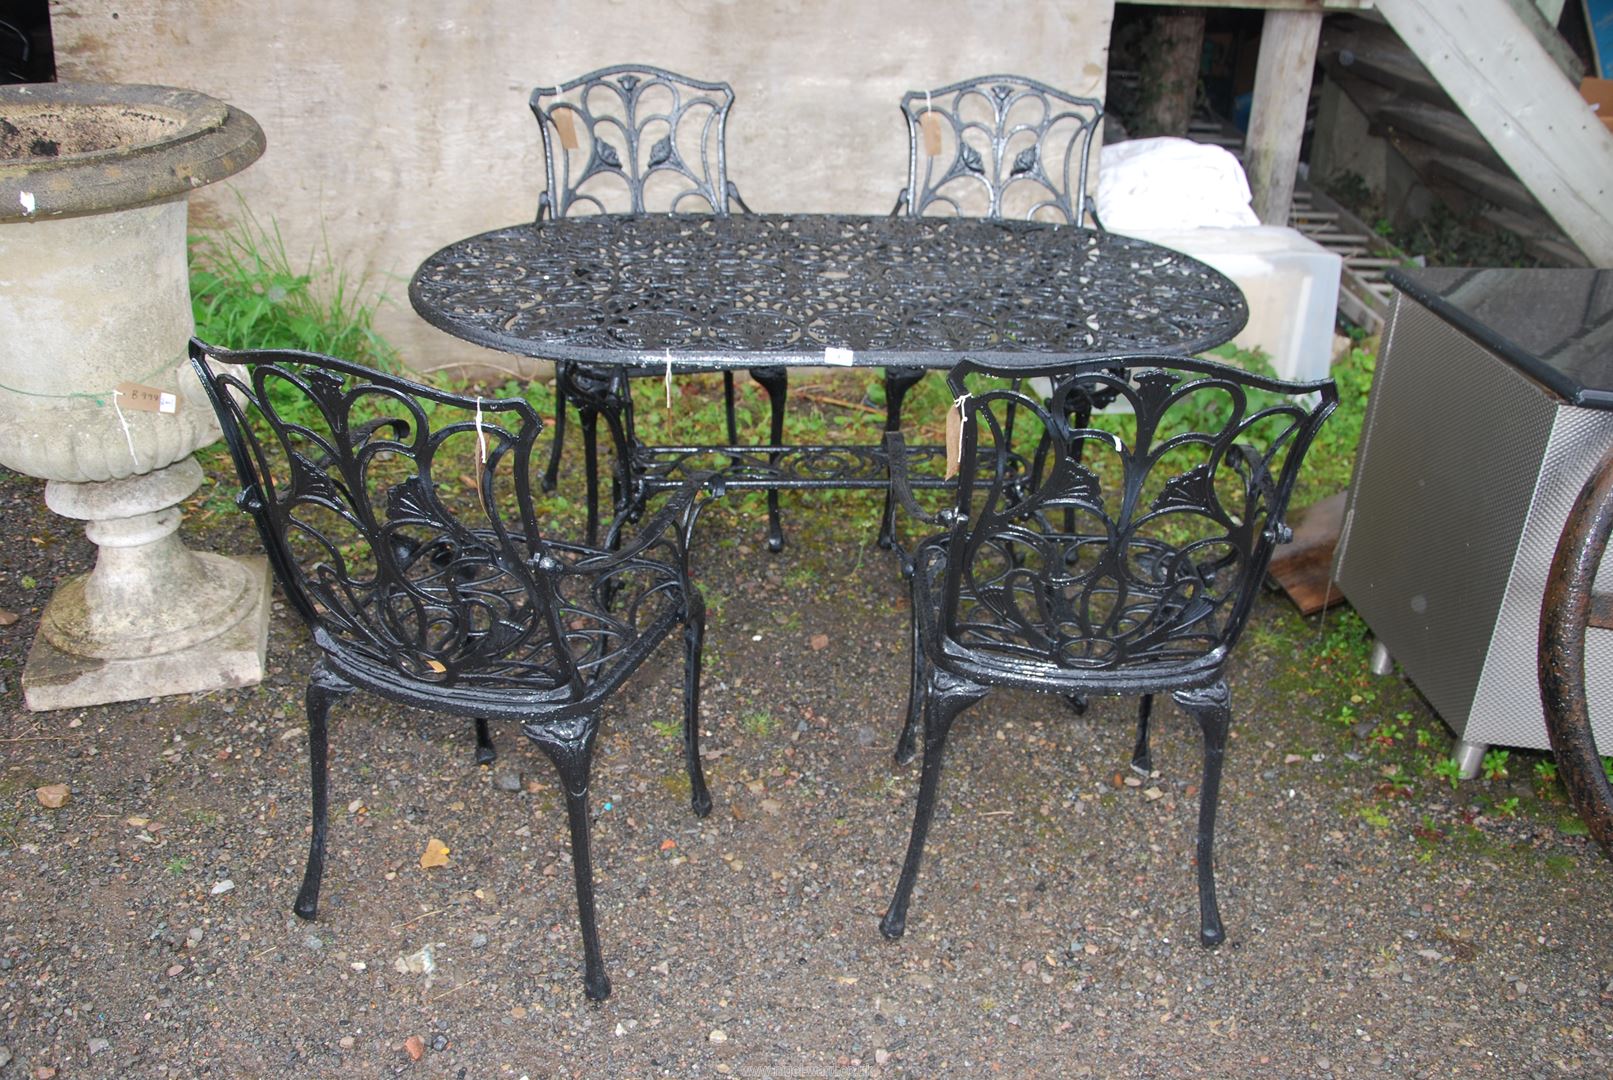 A black painted Aluminium decorative patio Table, 55" wide x 28" high and four chairs. - Image 2 of 2